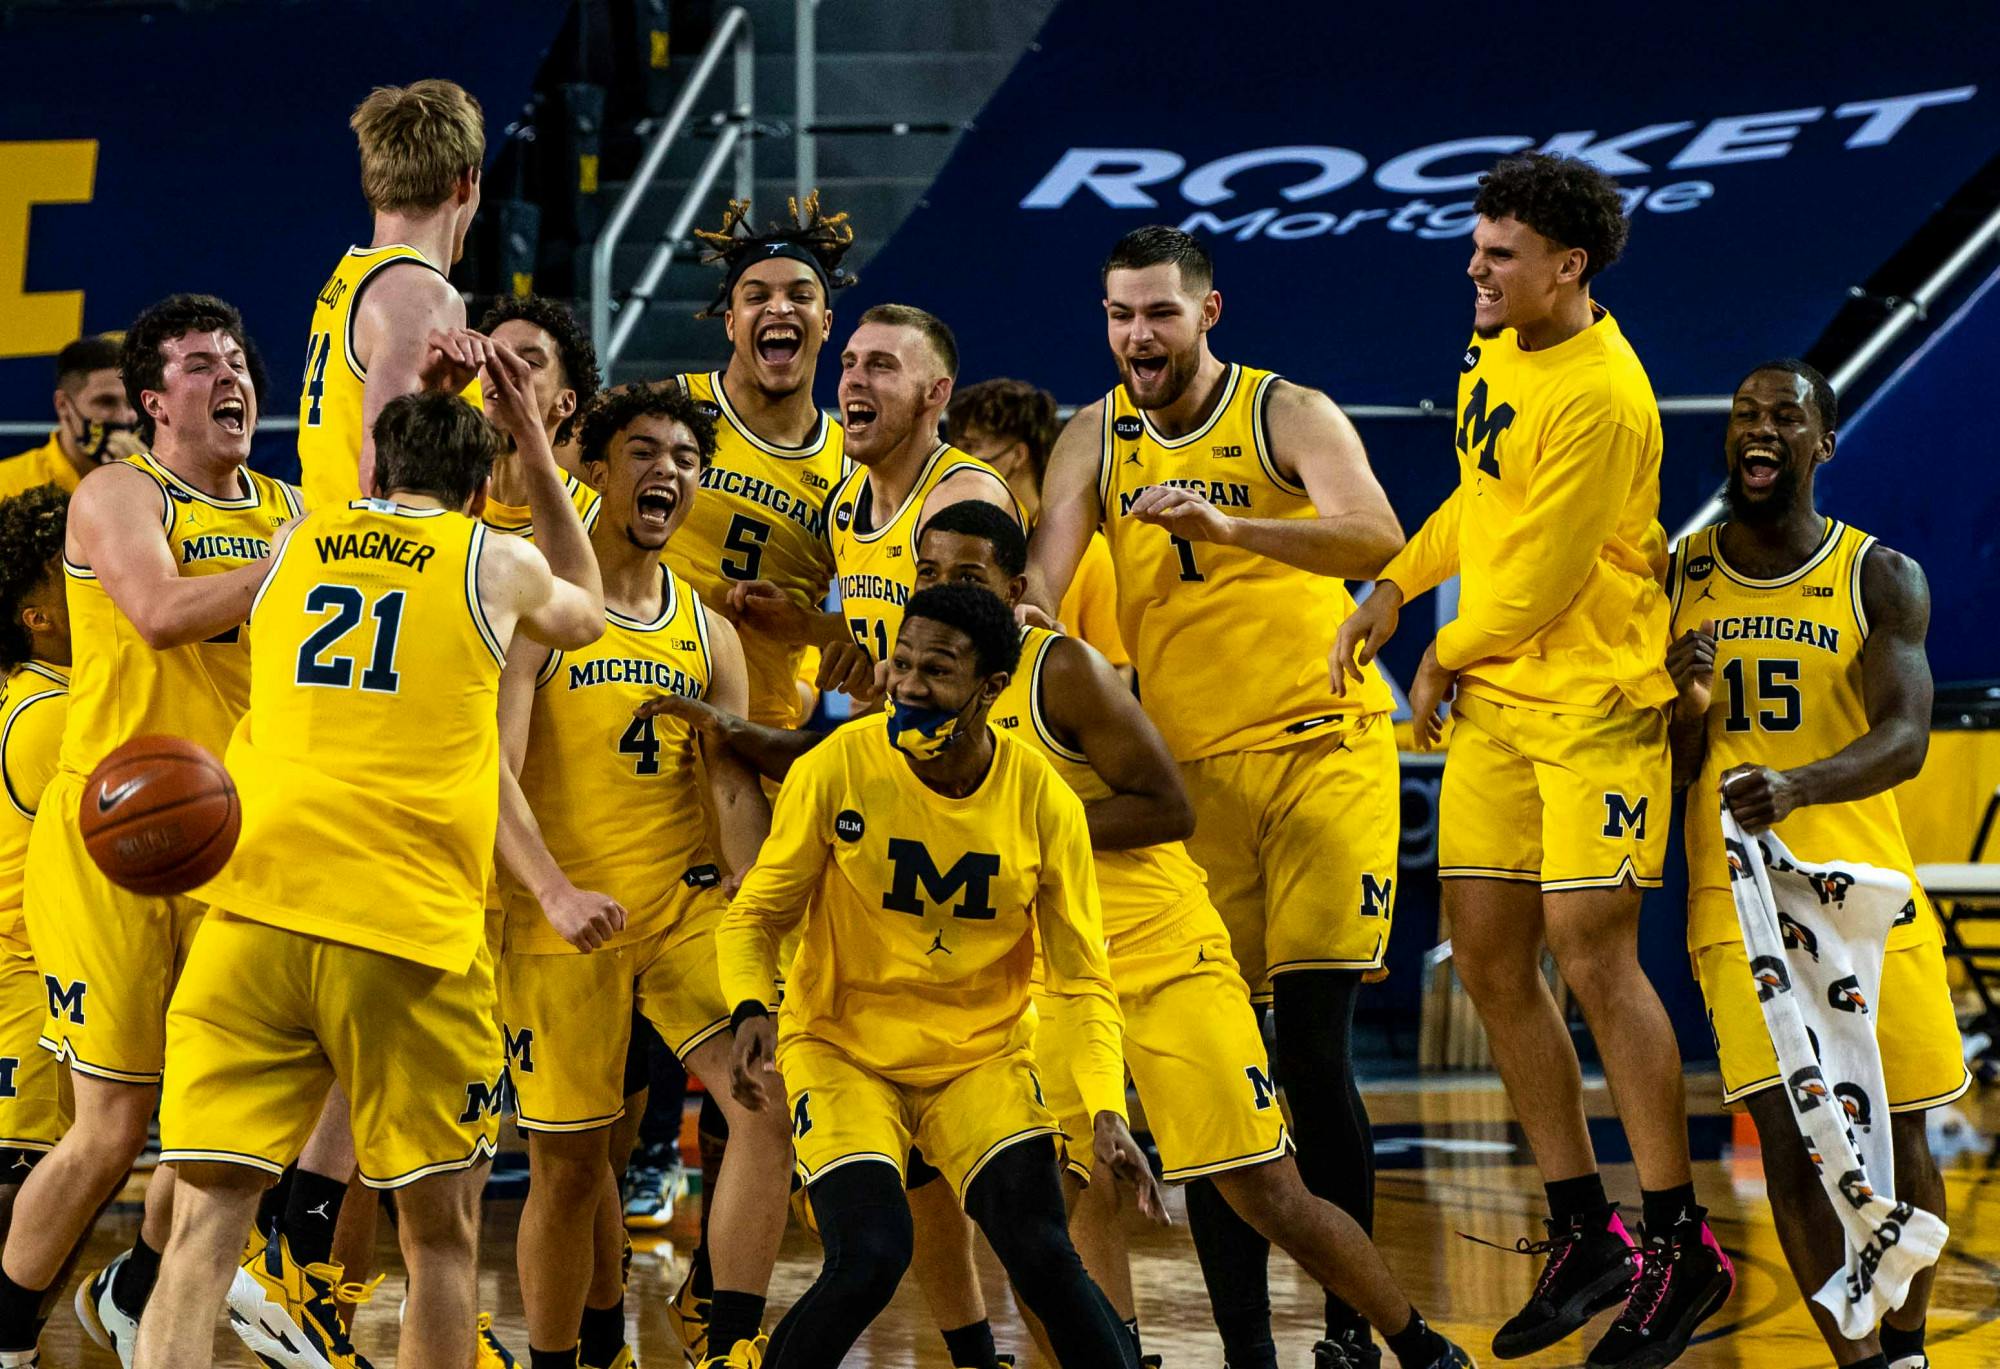 Michigan takes the title of Big Ten Champions after their win against Michigan State and the team celebrated together. The Wolverines crushed the Spartans, 69-50, at Crisler Center on Mar. 4, 2021. 